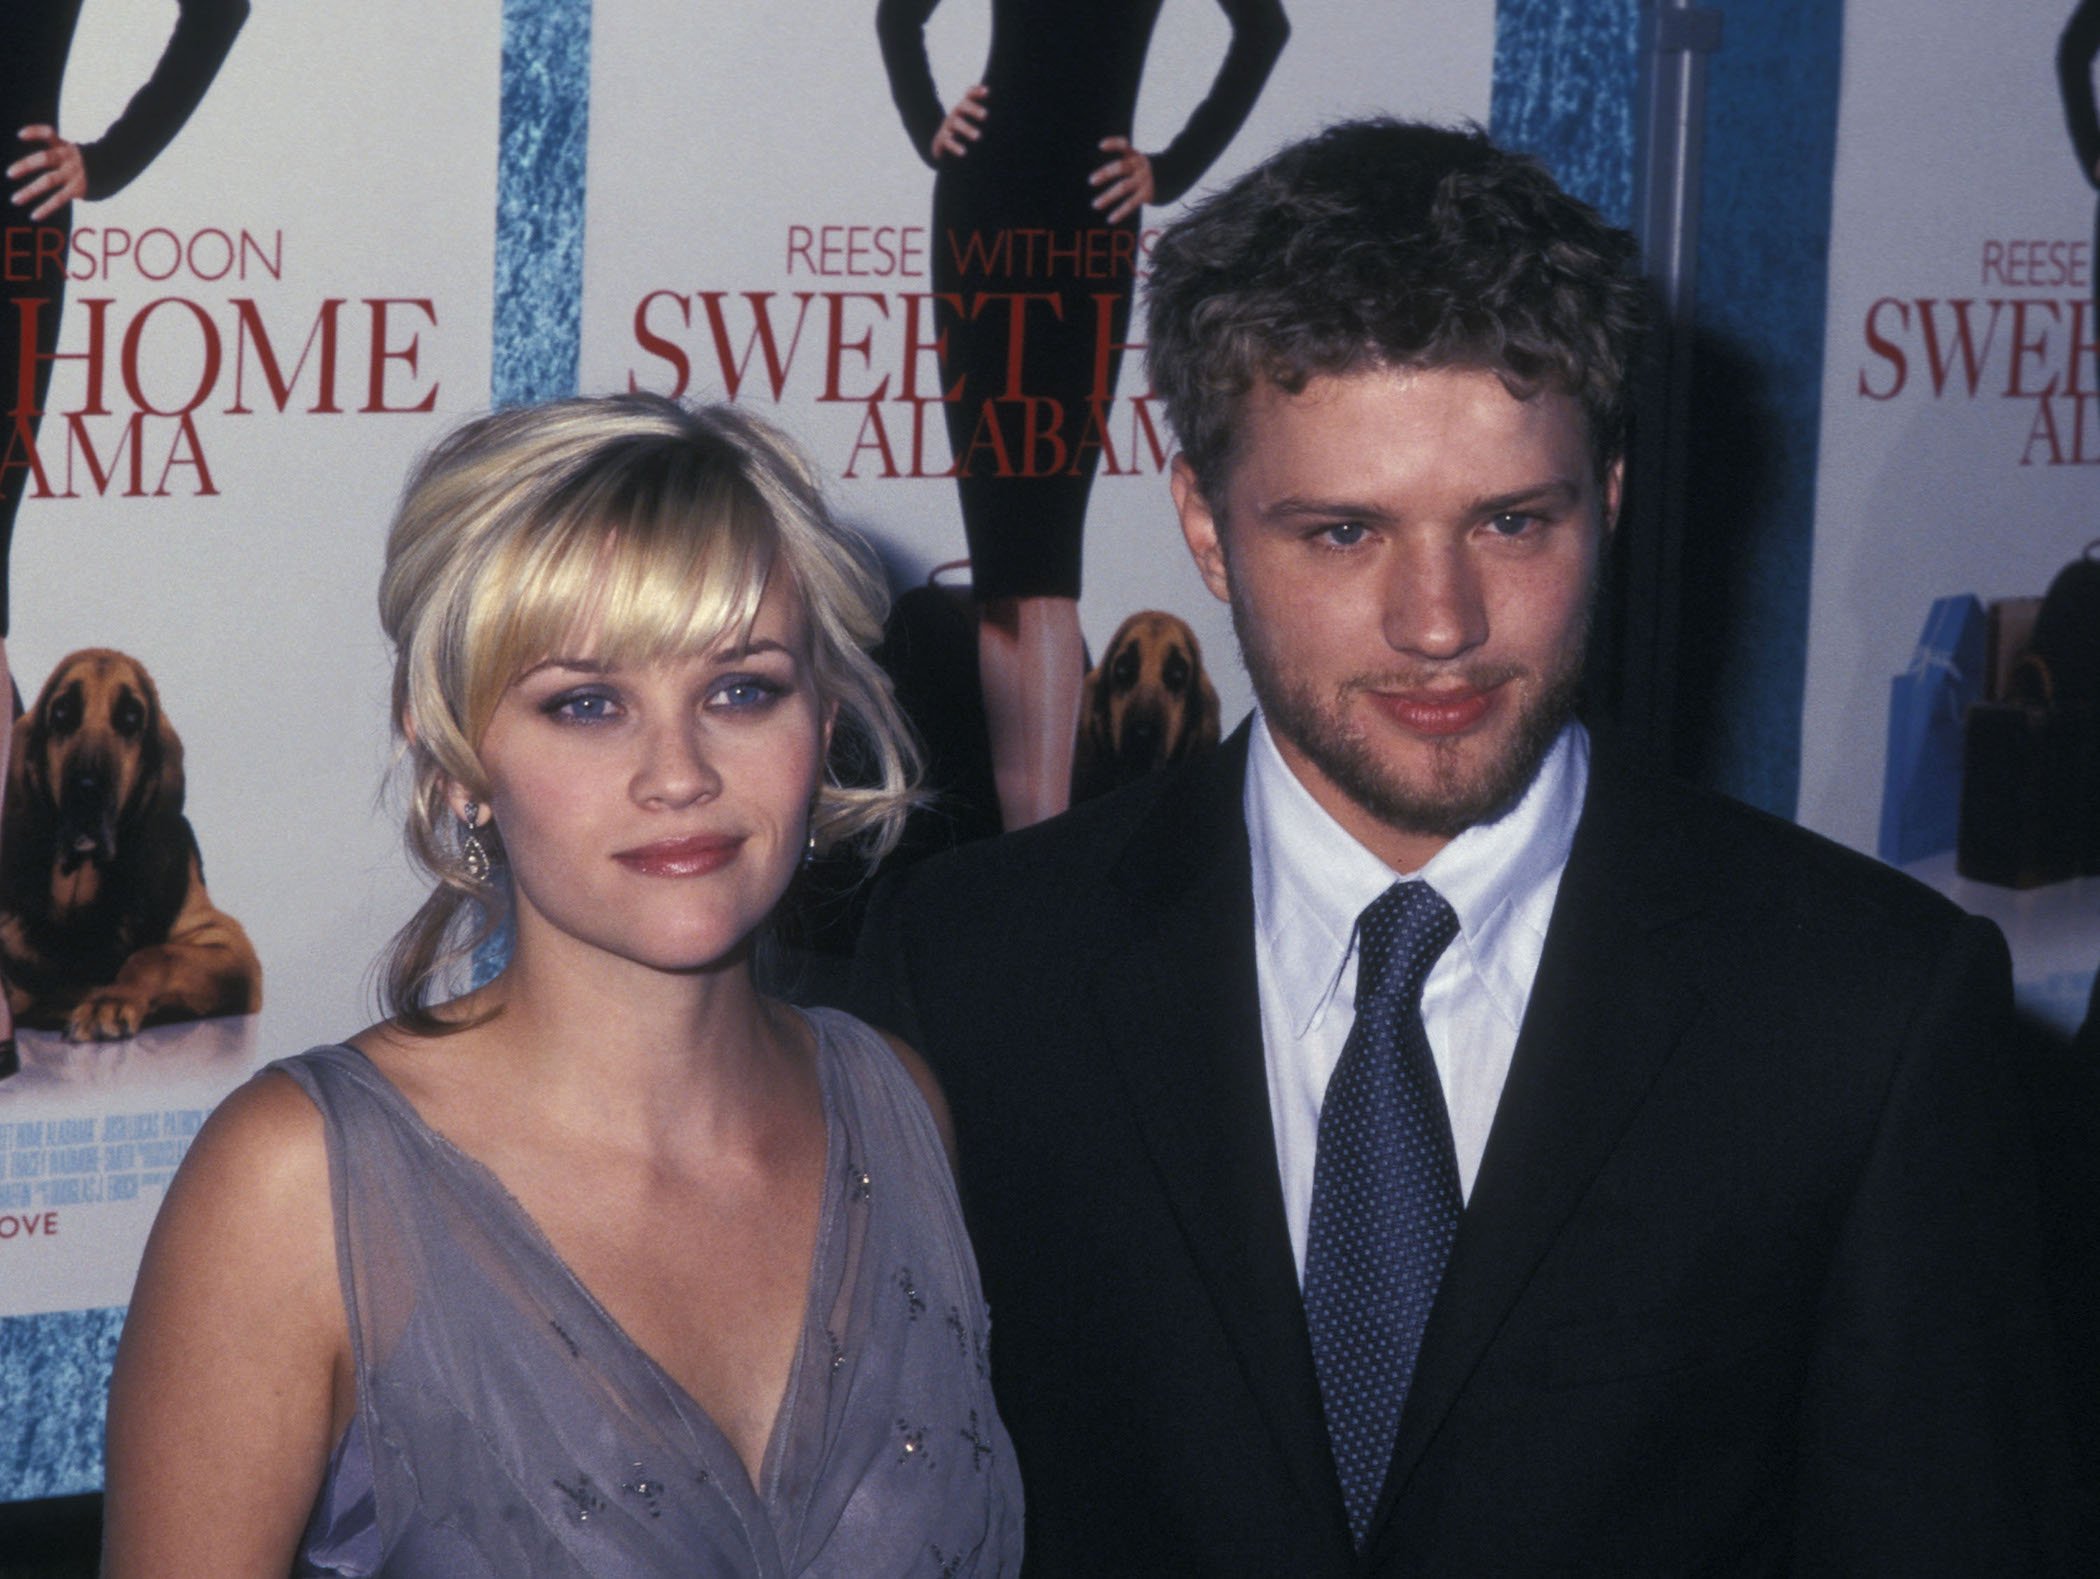 Reese Witherspoon and Ryan Phillippe 